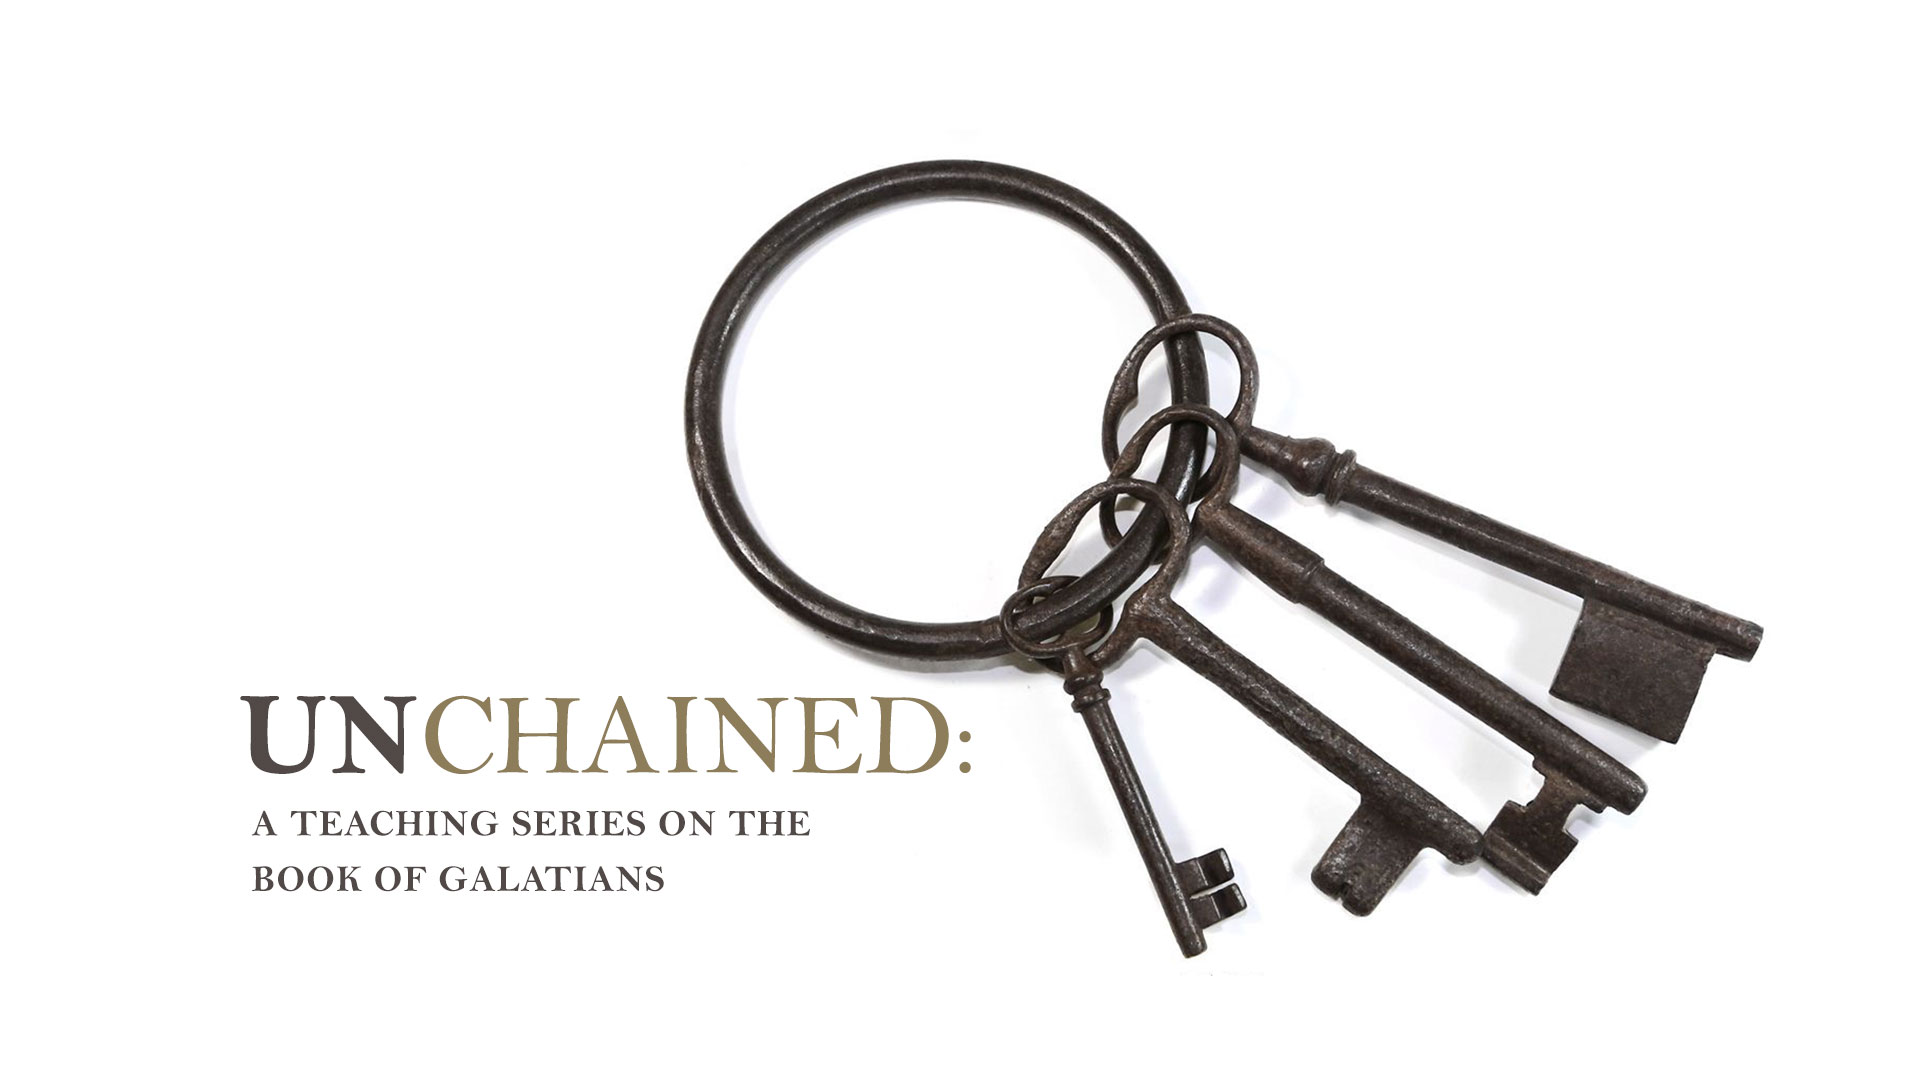 Unchained: Free To Change Culture